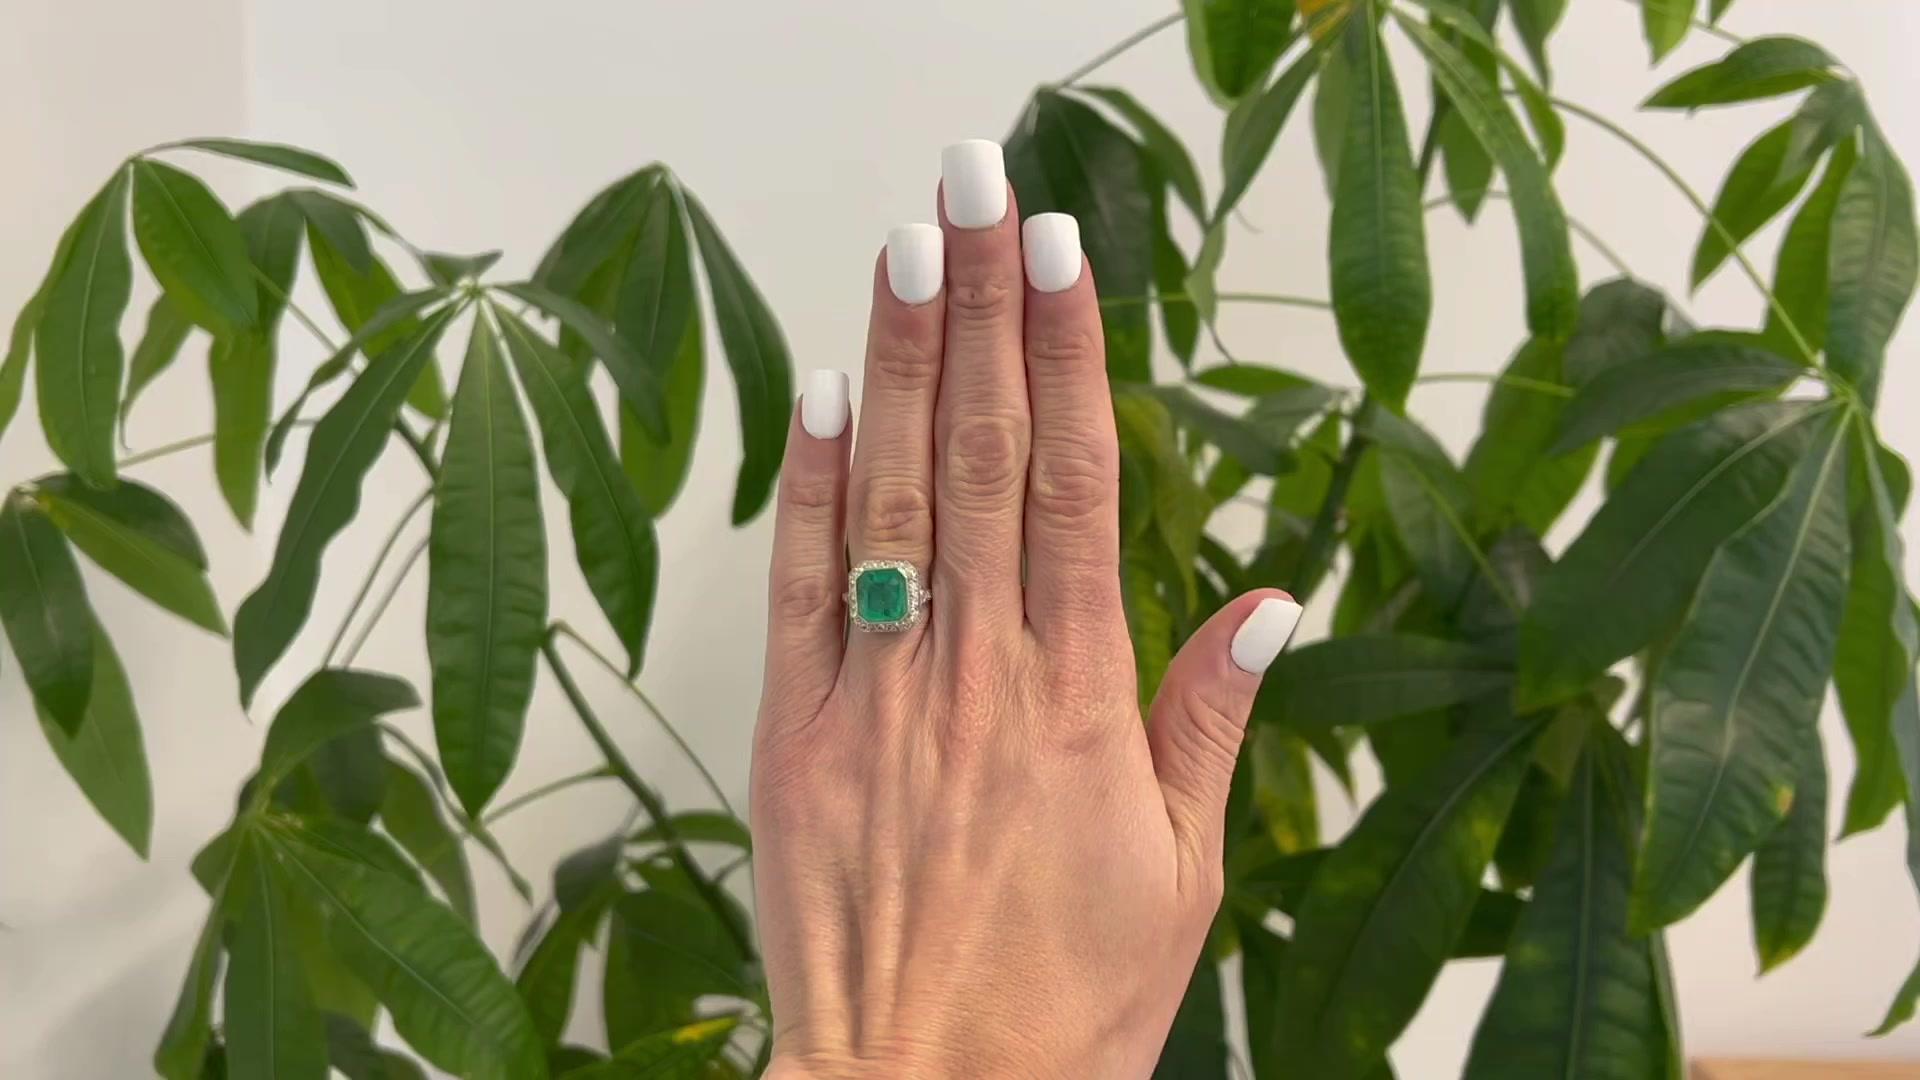 One Art Deco Inspired 4.27 Carats Emerald Diamond Platinum Halo Ring. Featuring one octagonal step cut emerald of 4.27 carats. Accented by 32 single cut diamonds with a total weight of approximately 0.70 carat, graded F color, VS clarity. Crafted in